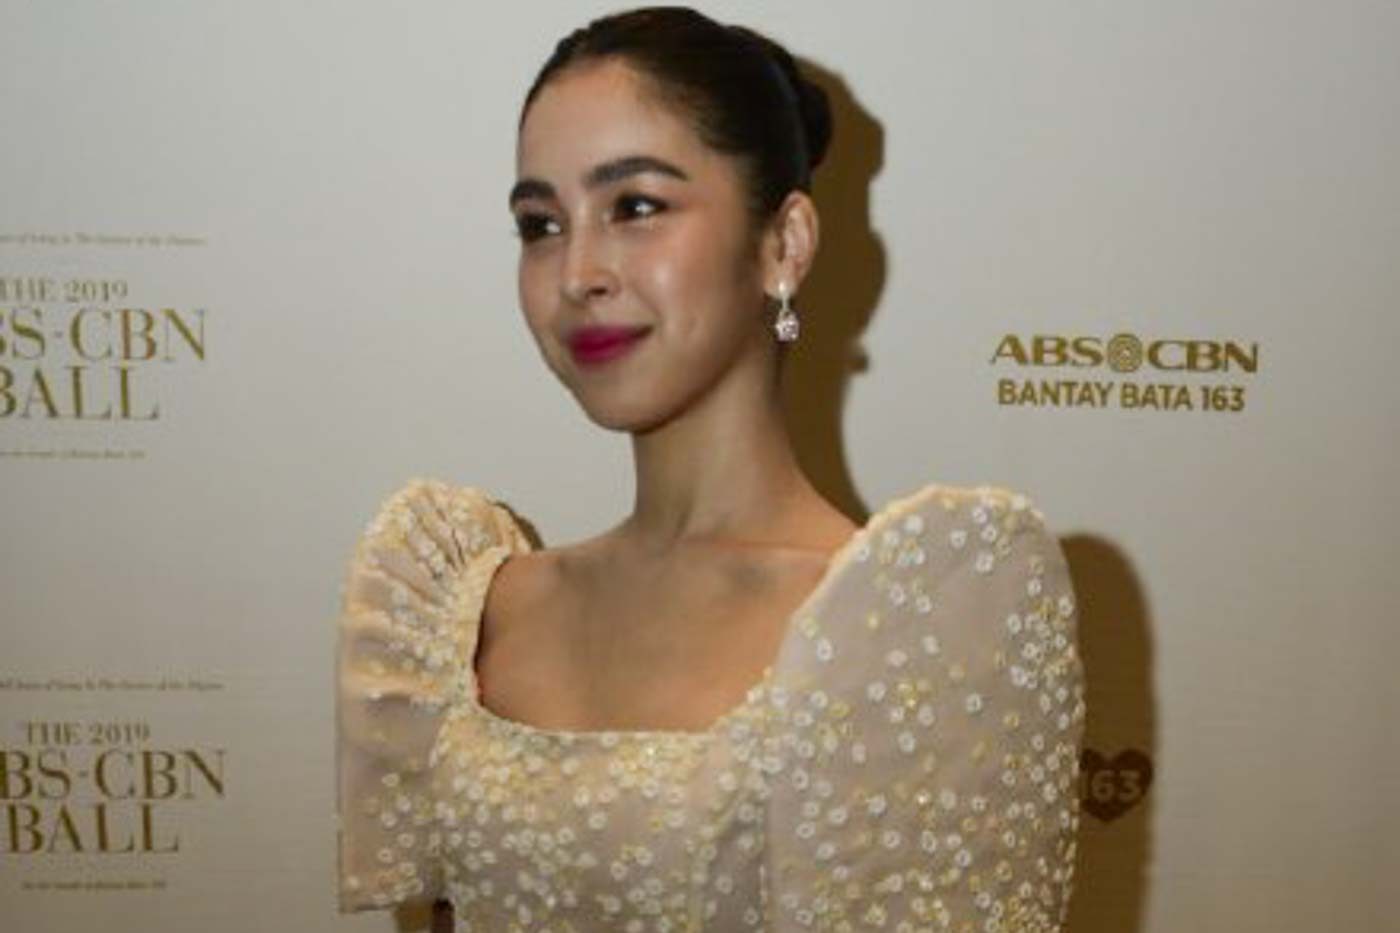 LOOK: Julia Barretto goes feminine at the ABS-CBN Ball 2019